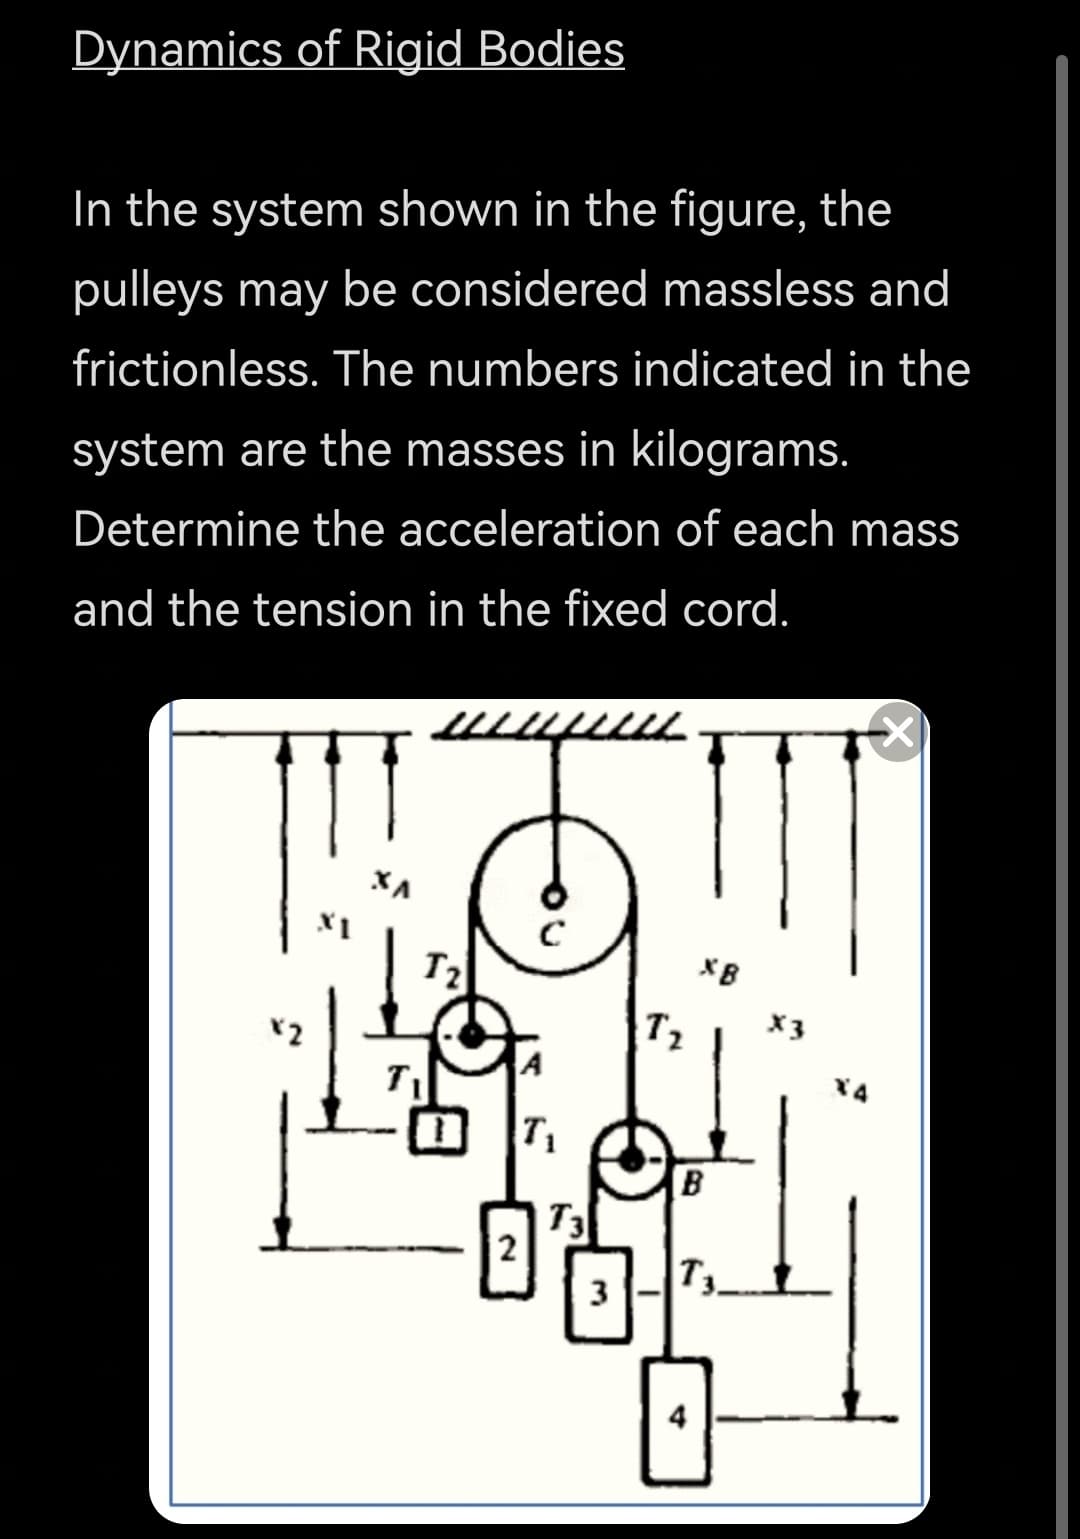 Dynamics of Rigid Bodies
In the system shown in the figure, the
pulleys may be considered massless and
frictionless. The numbers indicated in the
system are the masses in kilograms.
Determine the acceleration of each mass
and the tension in the fixed cord.
T2
XB
T2
X3
X4
T1
B
T3
T3
3
4
